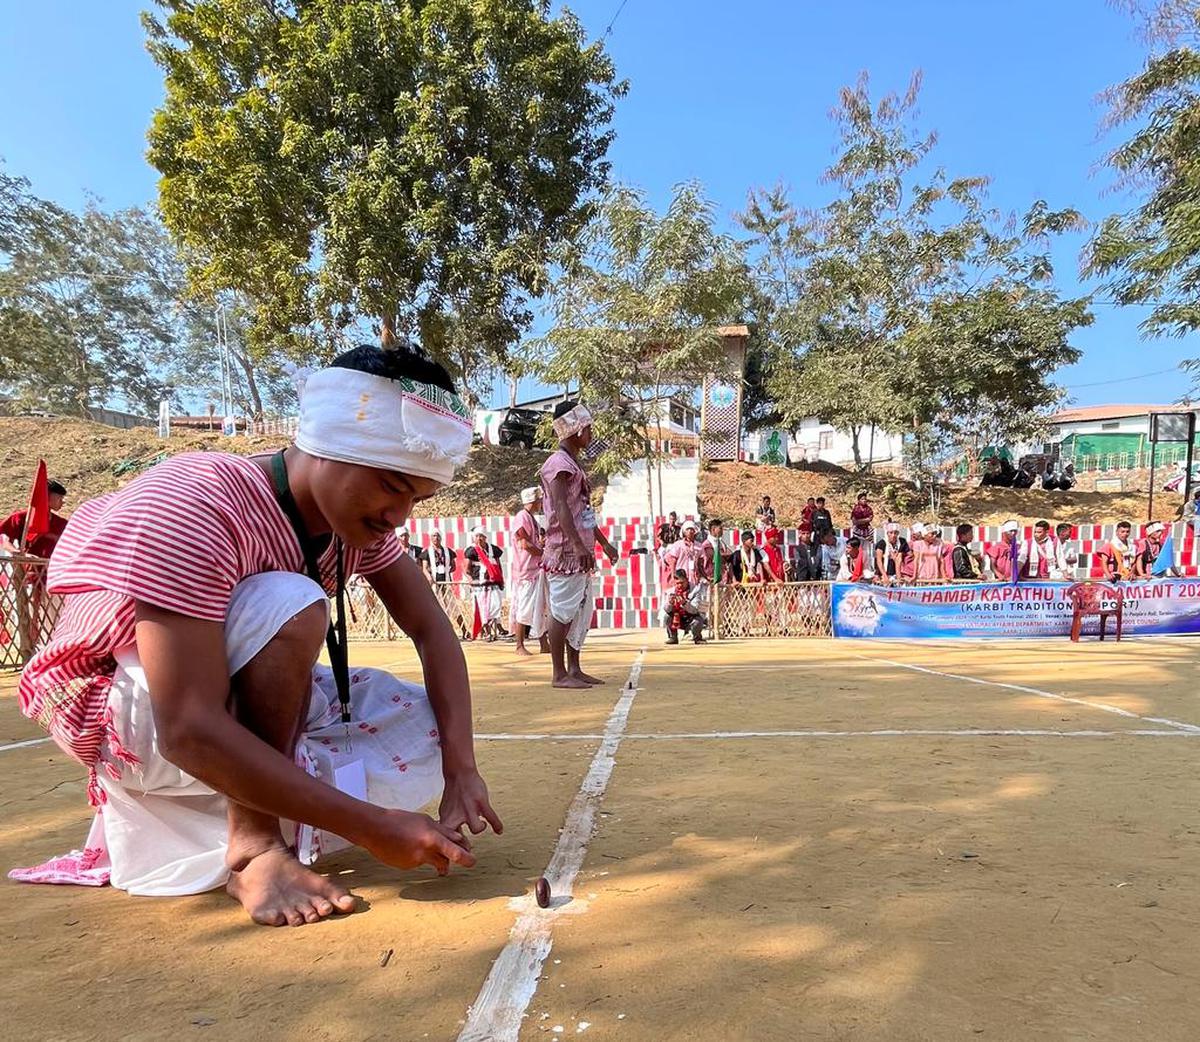 A game of ‘Hambi Kepathu’ being played during the 50th Karbi Youth Festival at Taralangso near central Assam’s Diphu town. 